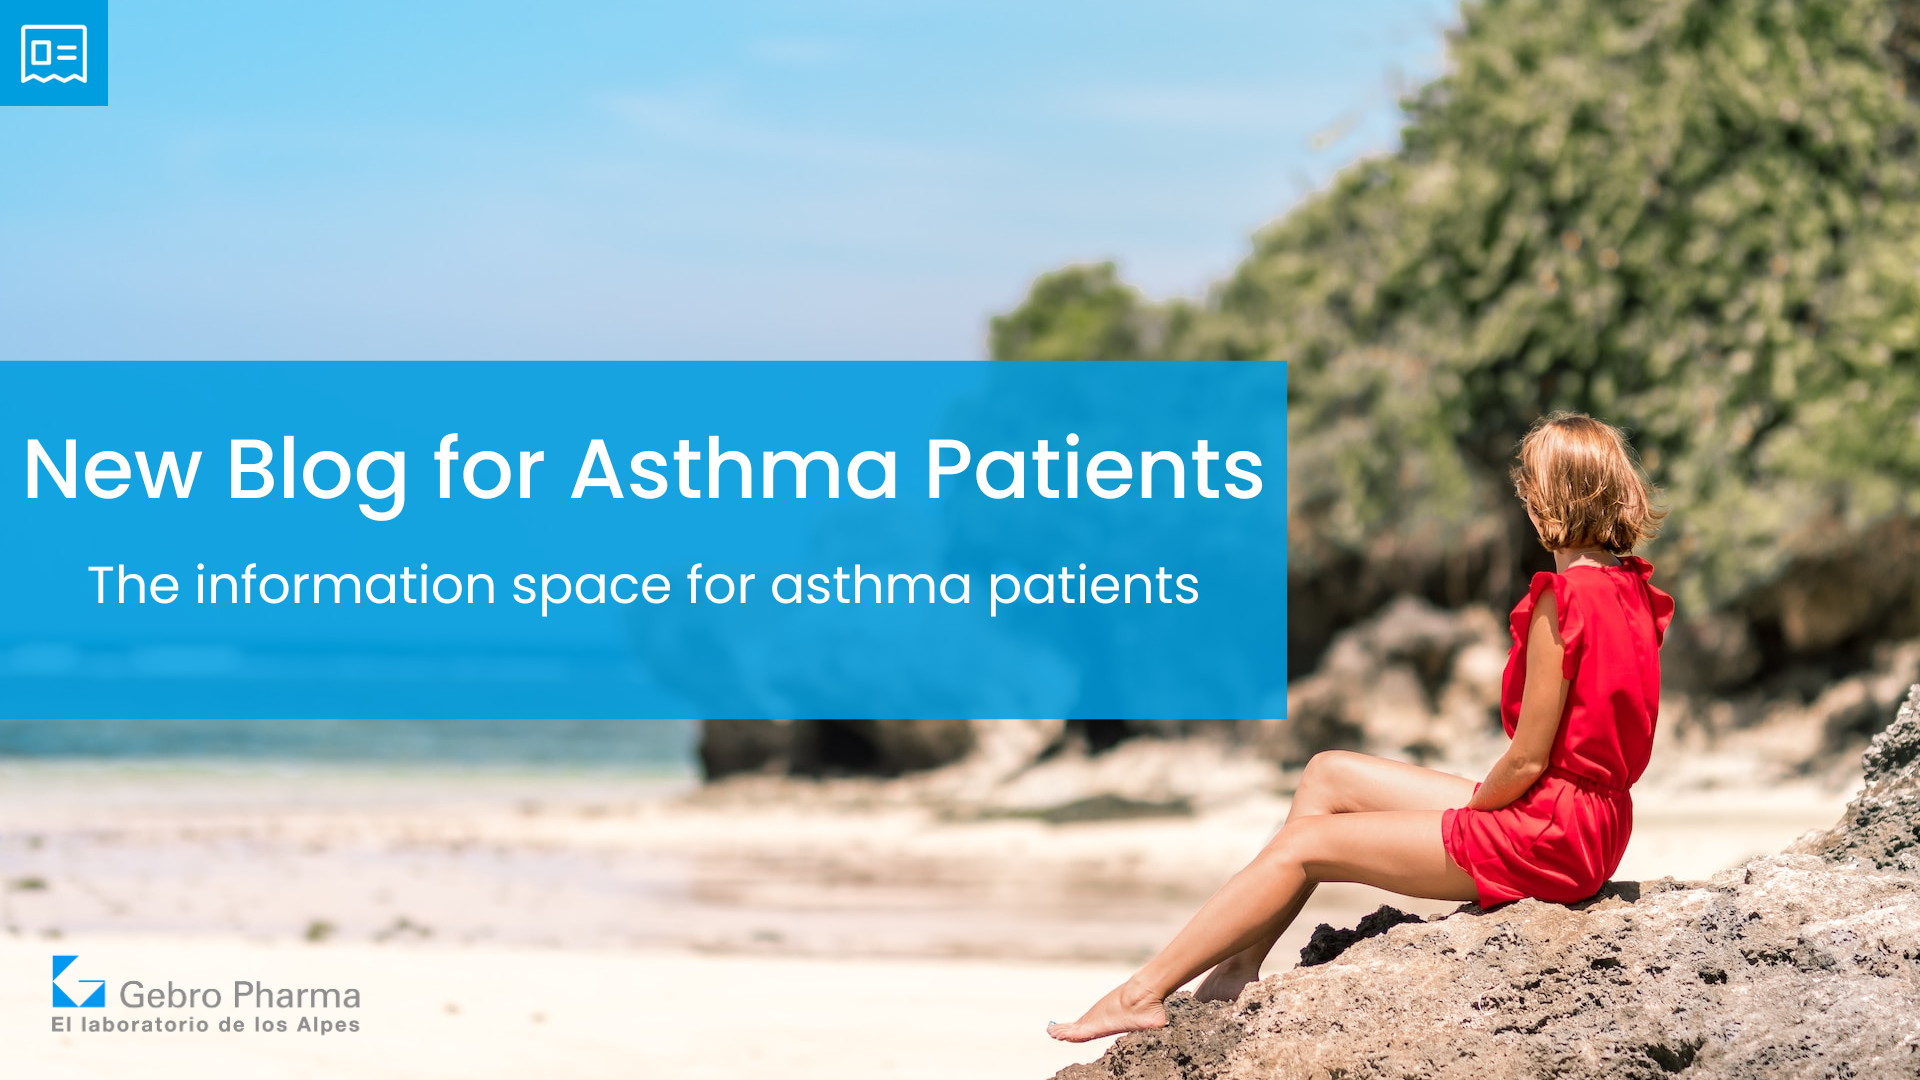 Gebro Pharma launches its new blog for asthma patients - #BHHMembersInitiatives